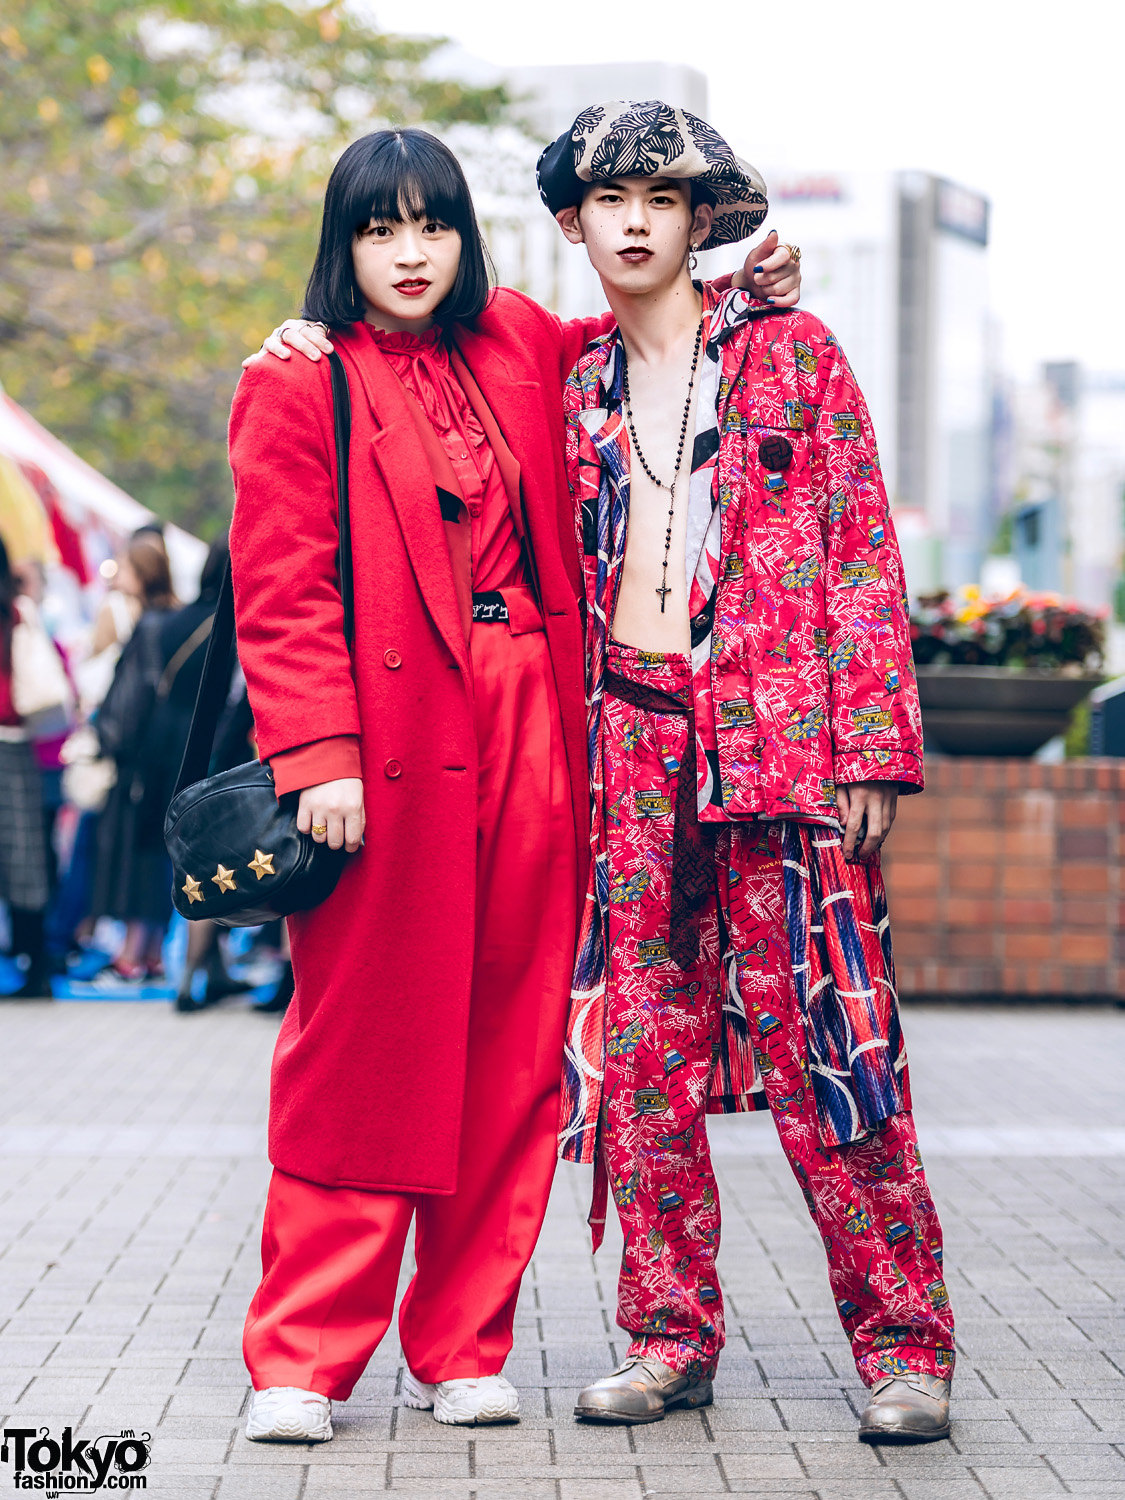 All Red & Mixed Prints Tokyo Street Styles w/ Christopher Nemeth Rope ...